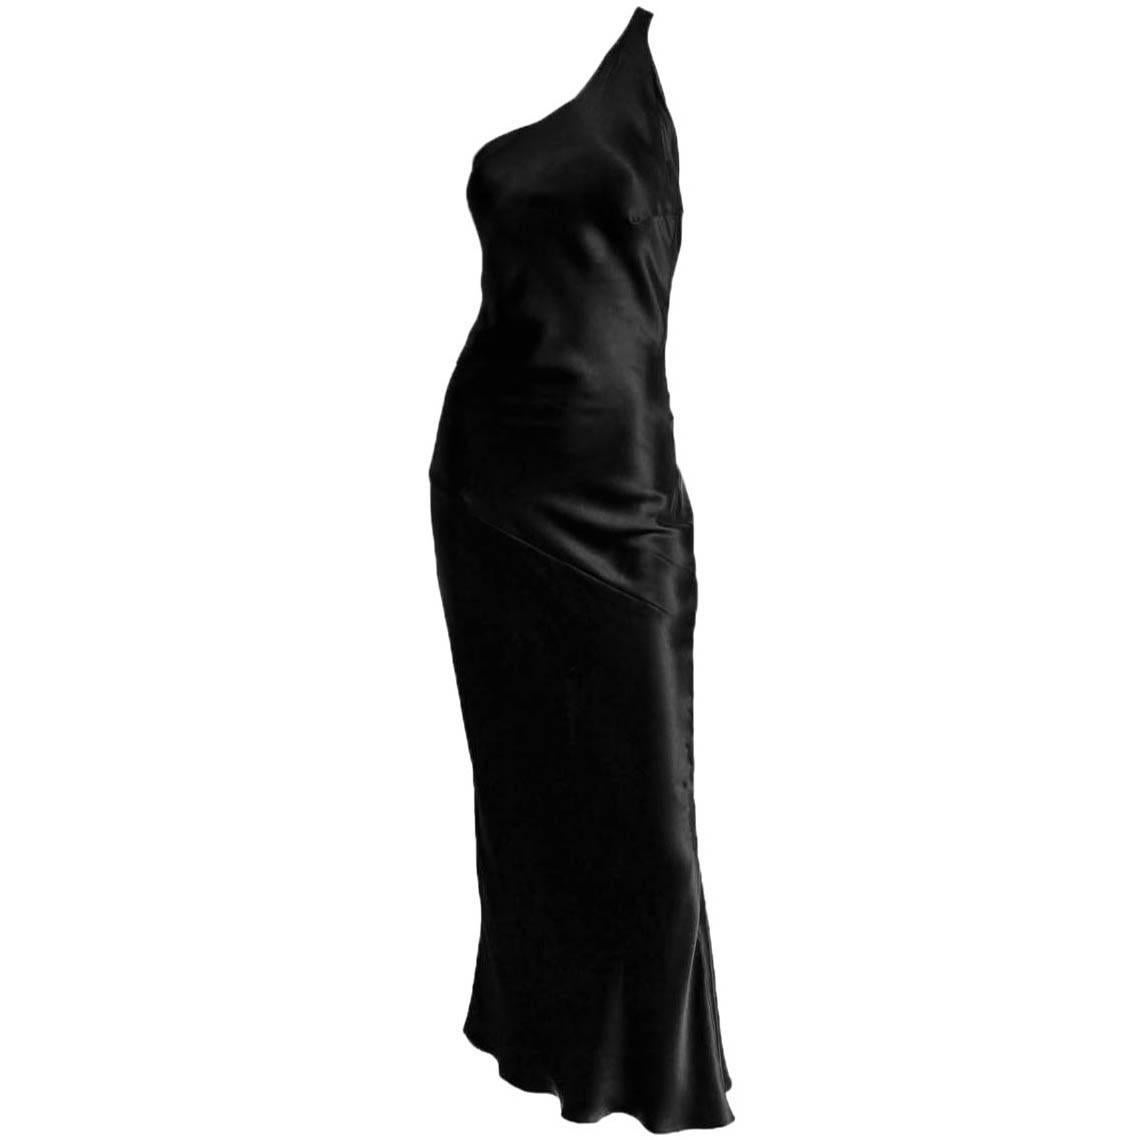 Uber Chic Tom Ford Gucci SS 2000 Black Silk Minimalist Backless Runway Gown! 44 For Sale